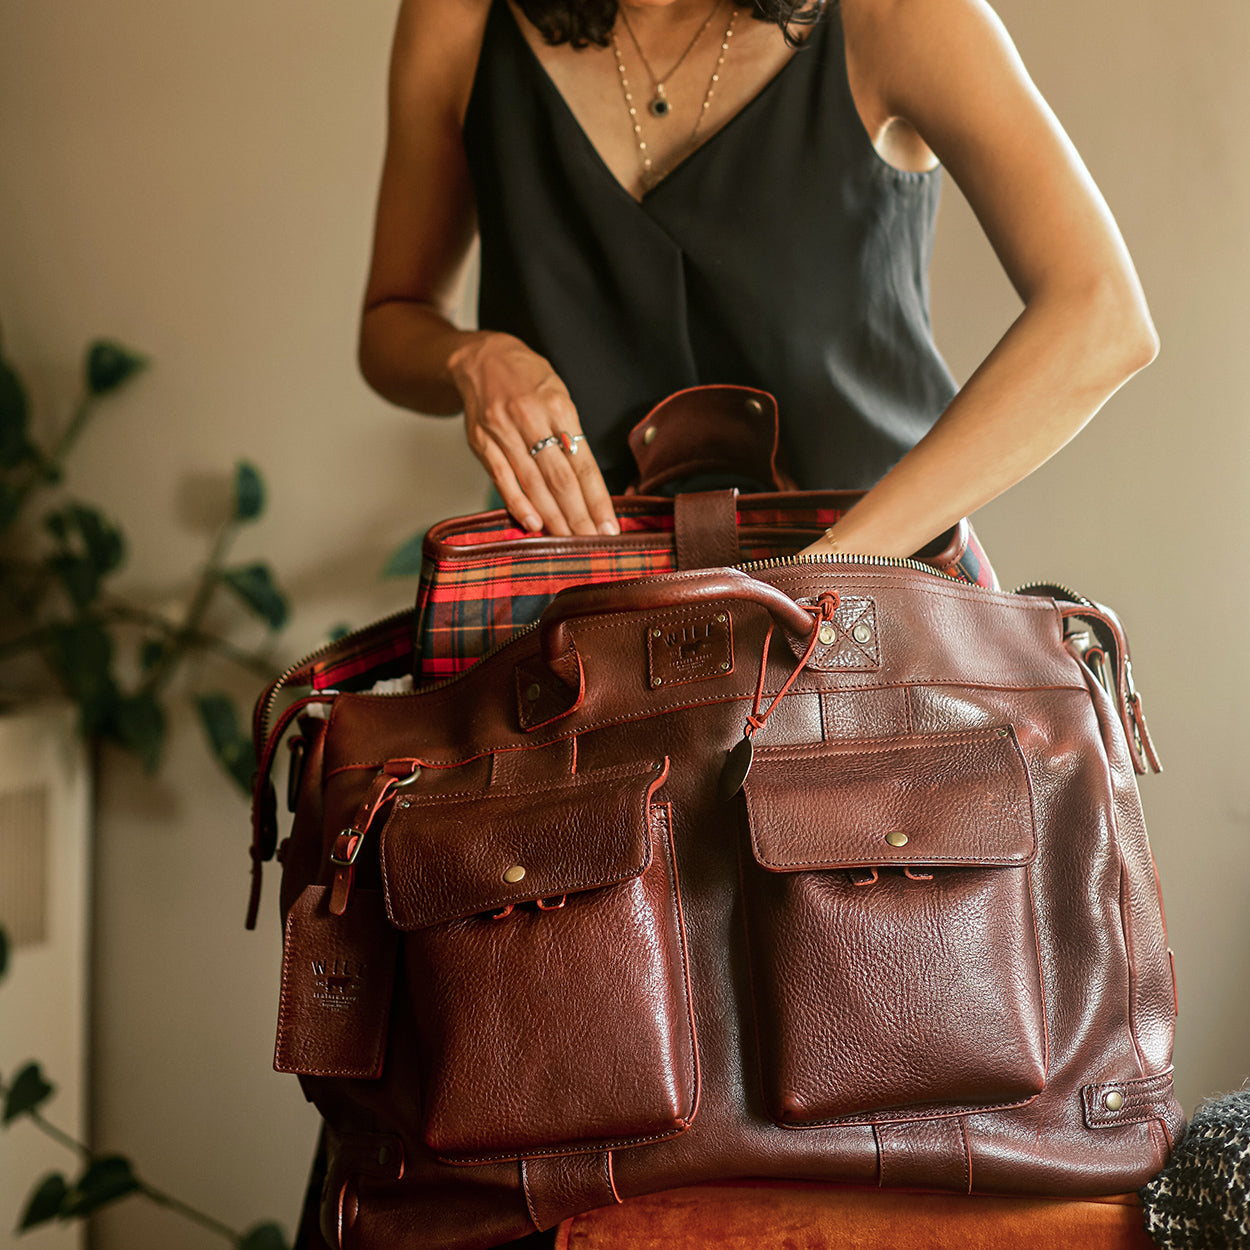 Leather Travel Duffle in Cognac by Will Leather Goods